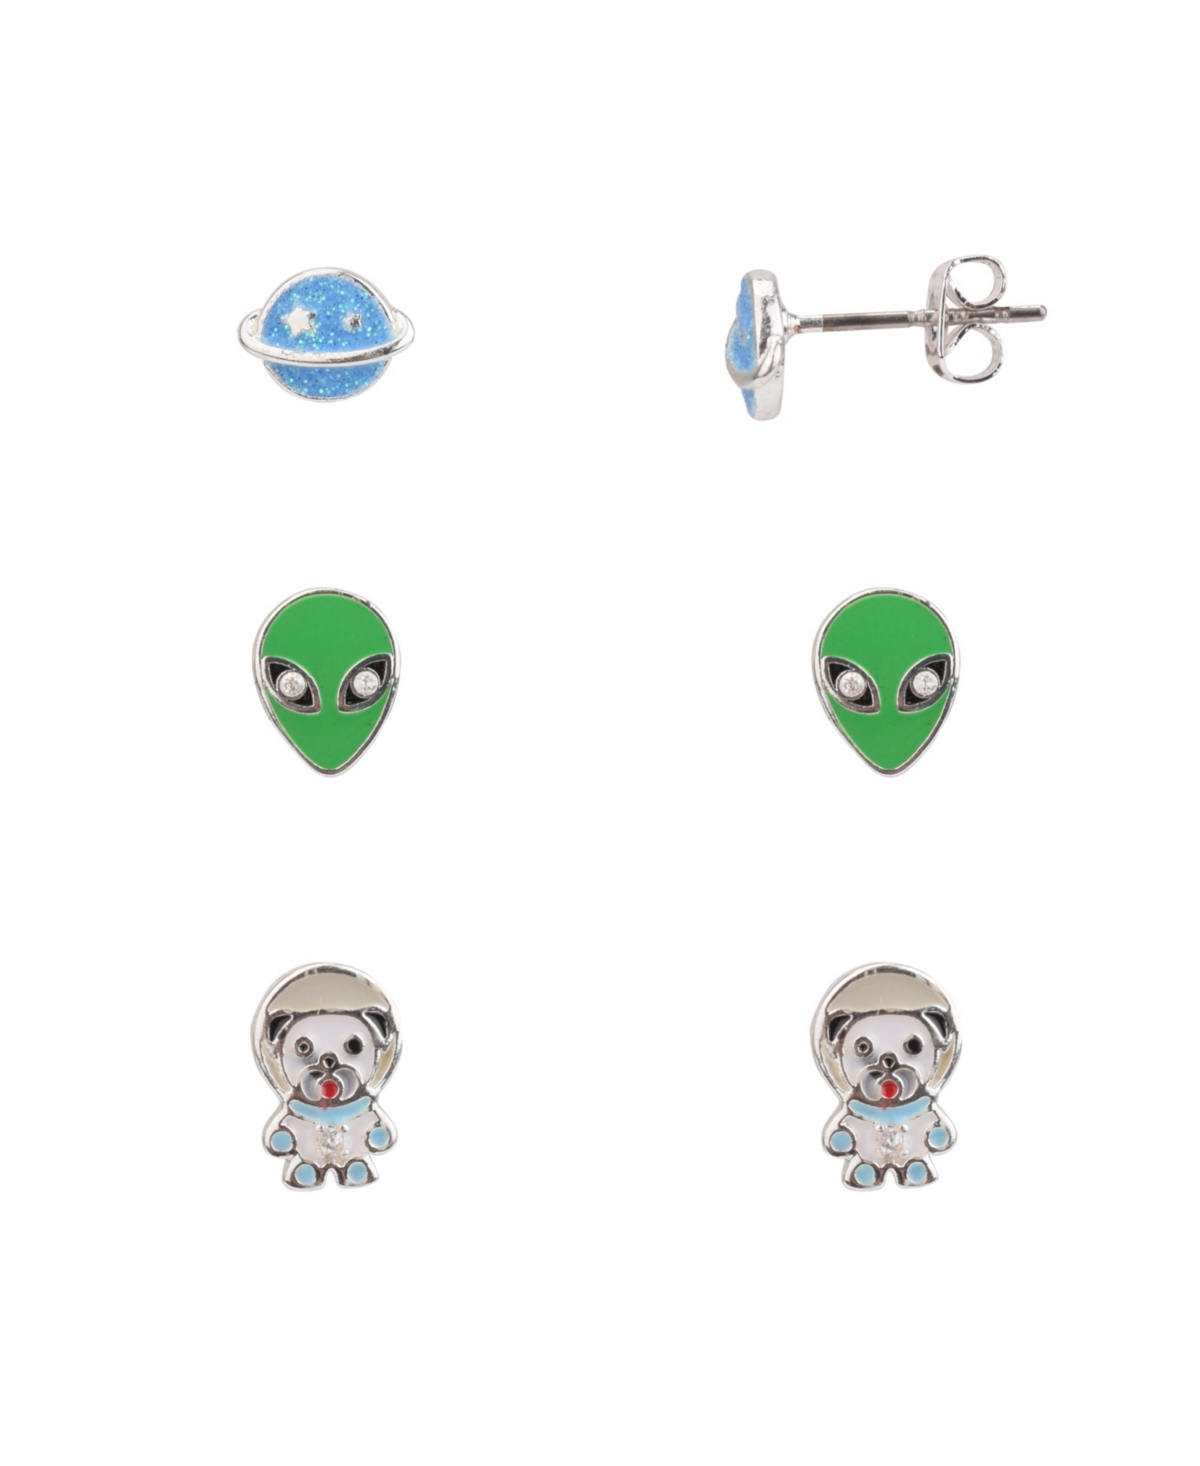 Fao Schwarz Alien, Dog Astronaut And Planet Trio Earring Set, 6 Pieces In Multi